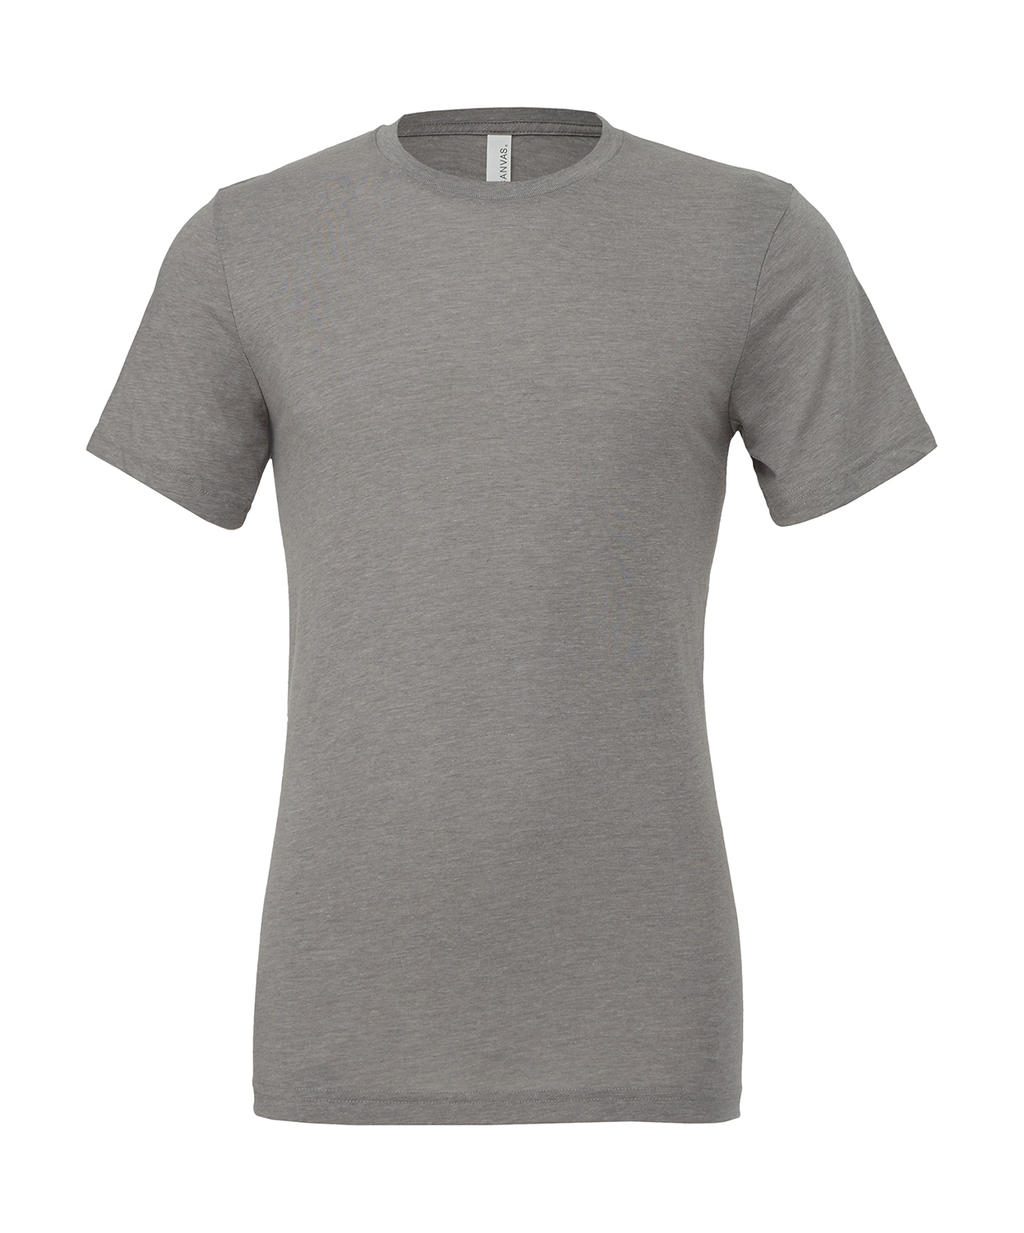  Unisex Triblend Short Sleeve Tee in Farbe Athletic Grey Triblend